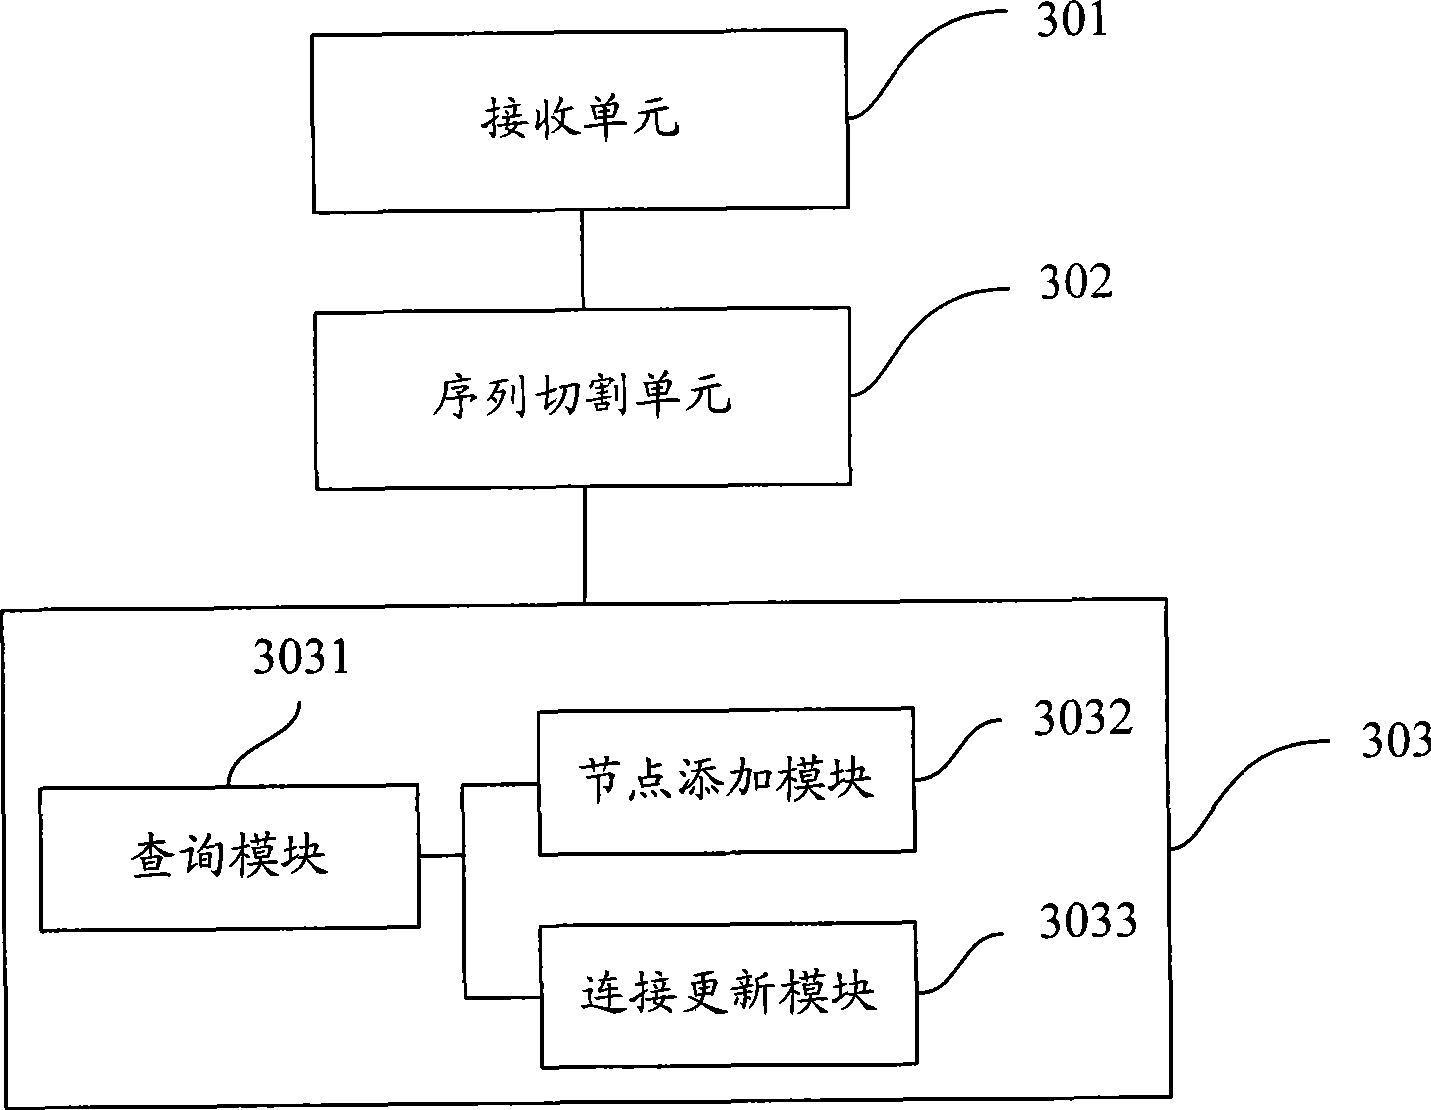 Method and system for drawing construction in short sequence assembly